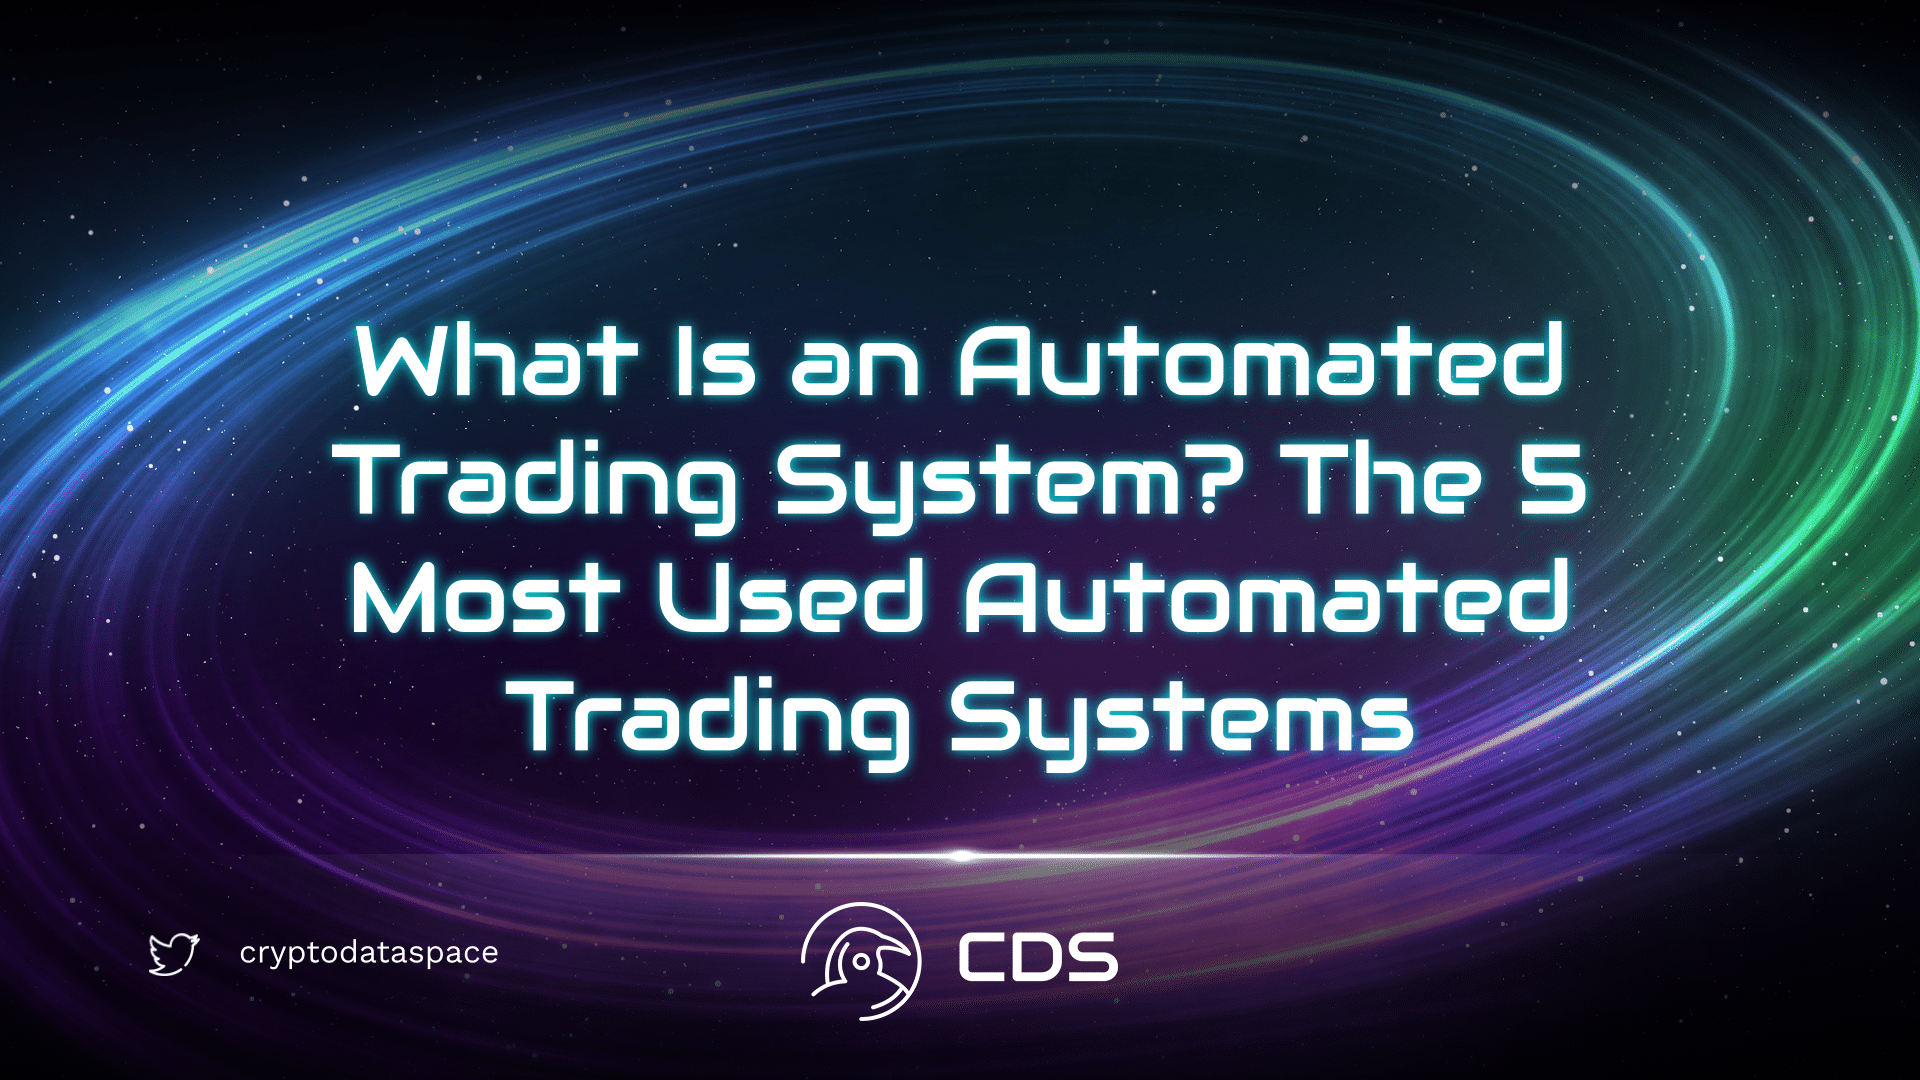 What Is an Automated Trading System? The 5 Most Used Automated Trading Systems